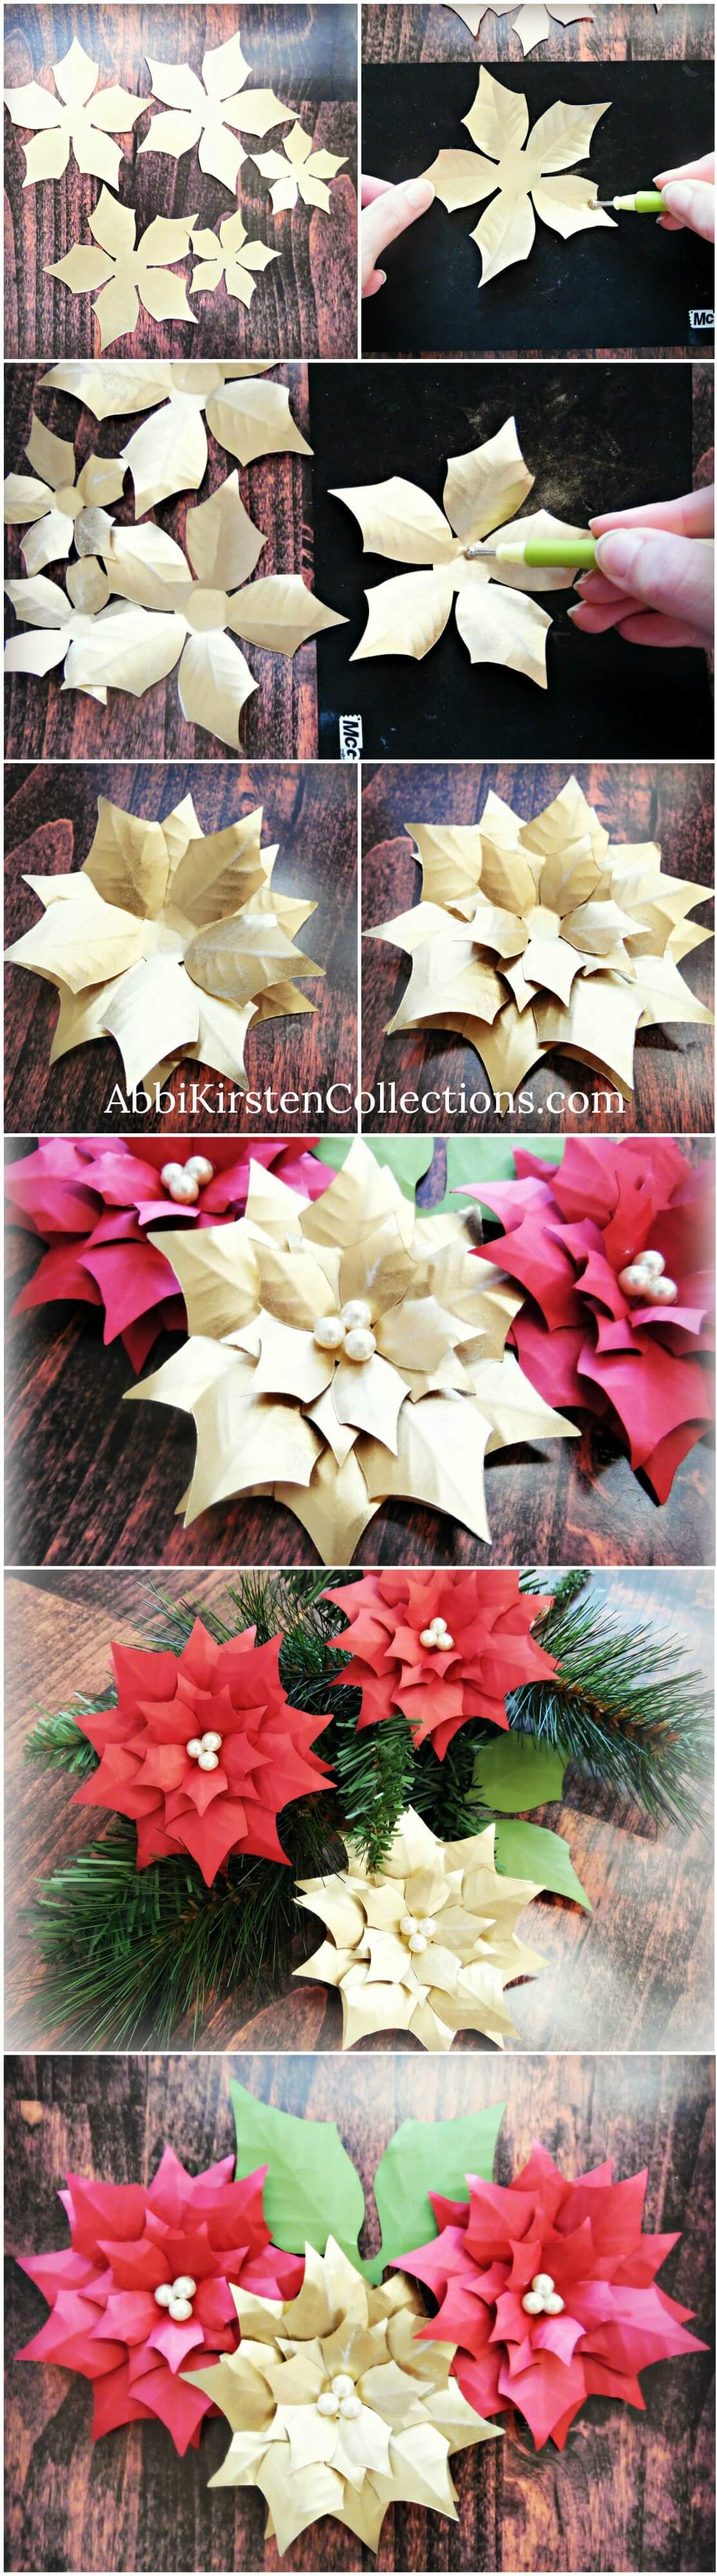 How to Make Lighted Poinsettia Garland - Step by Step Tutorial